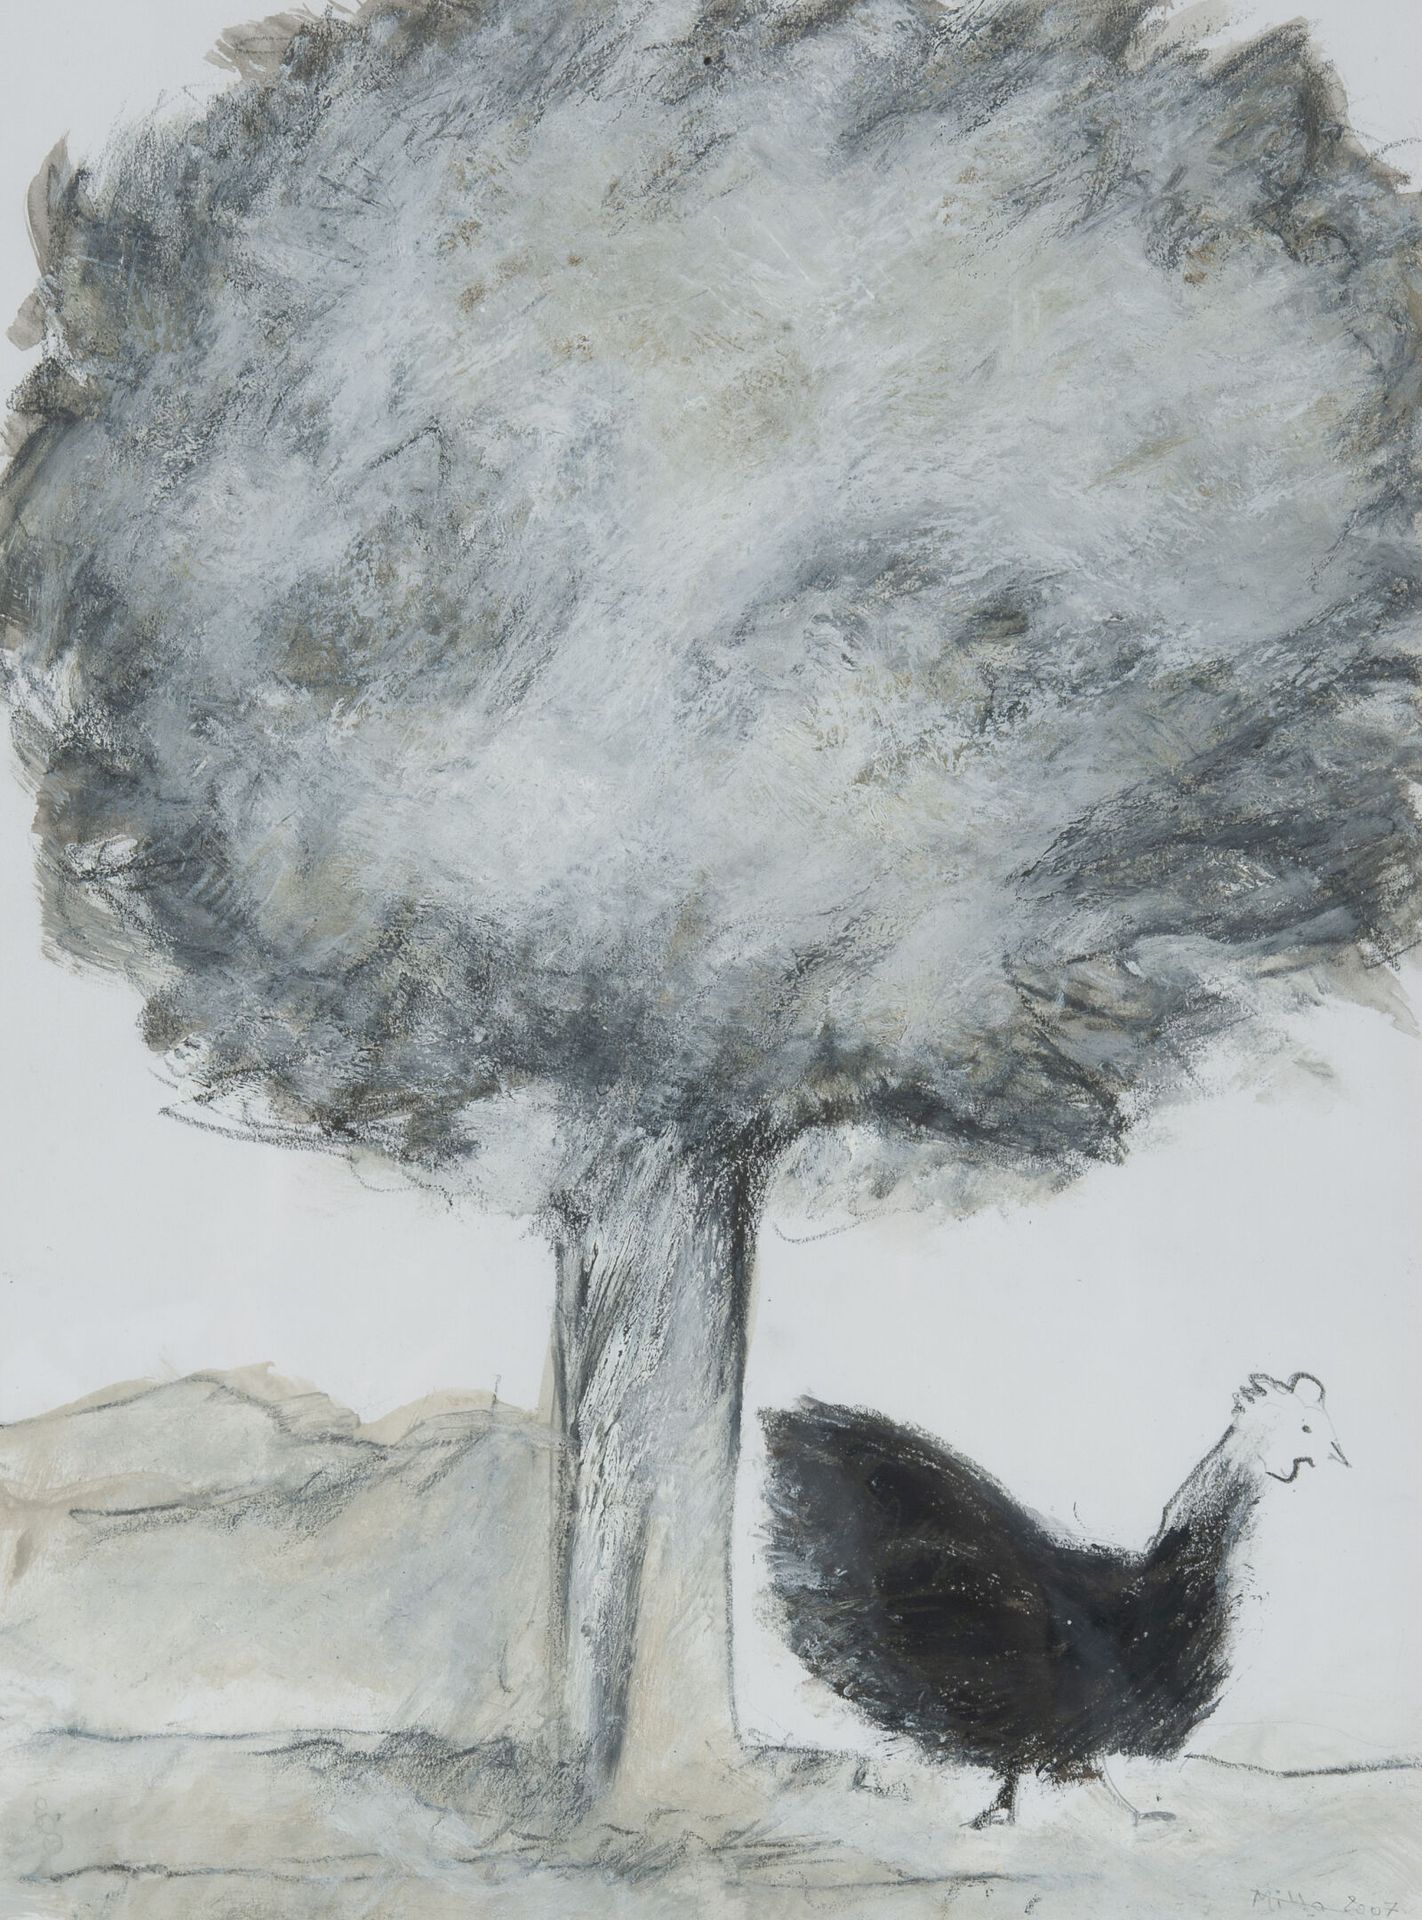 Francine MILLOT (1943) Chicken under a tree, 2007.

Graphite, charcoal and gouac&hellip;